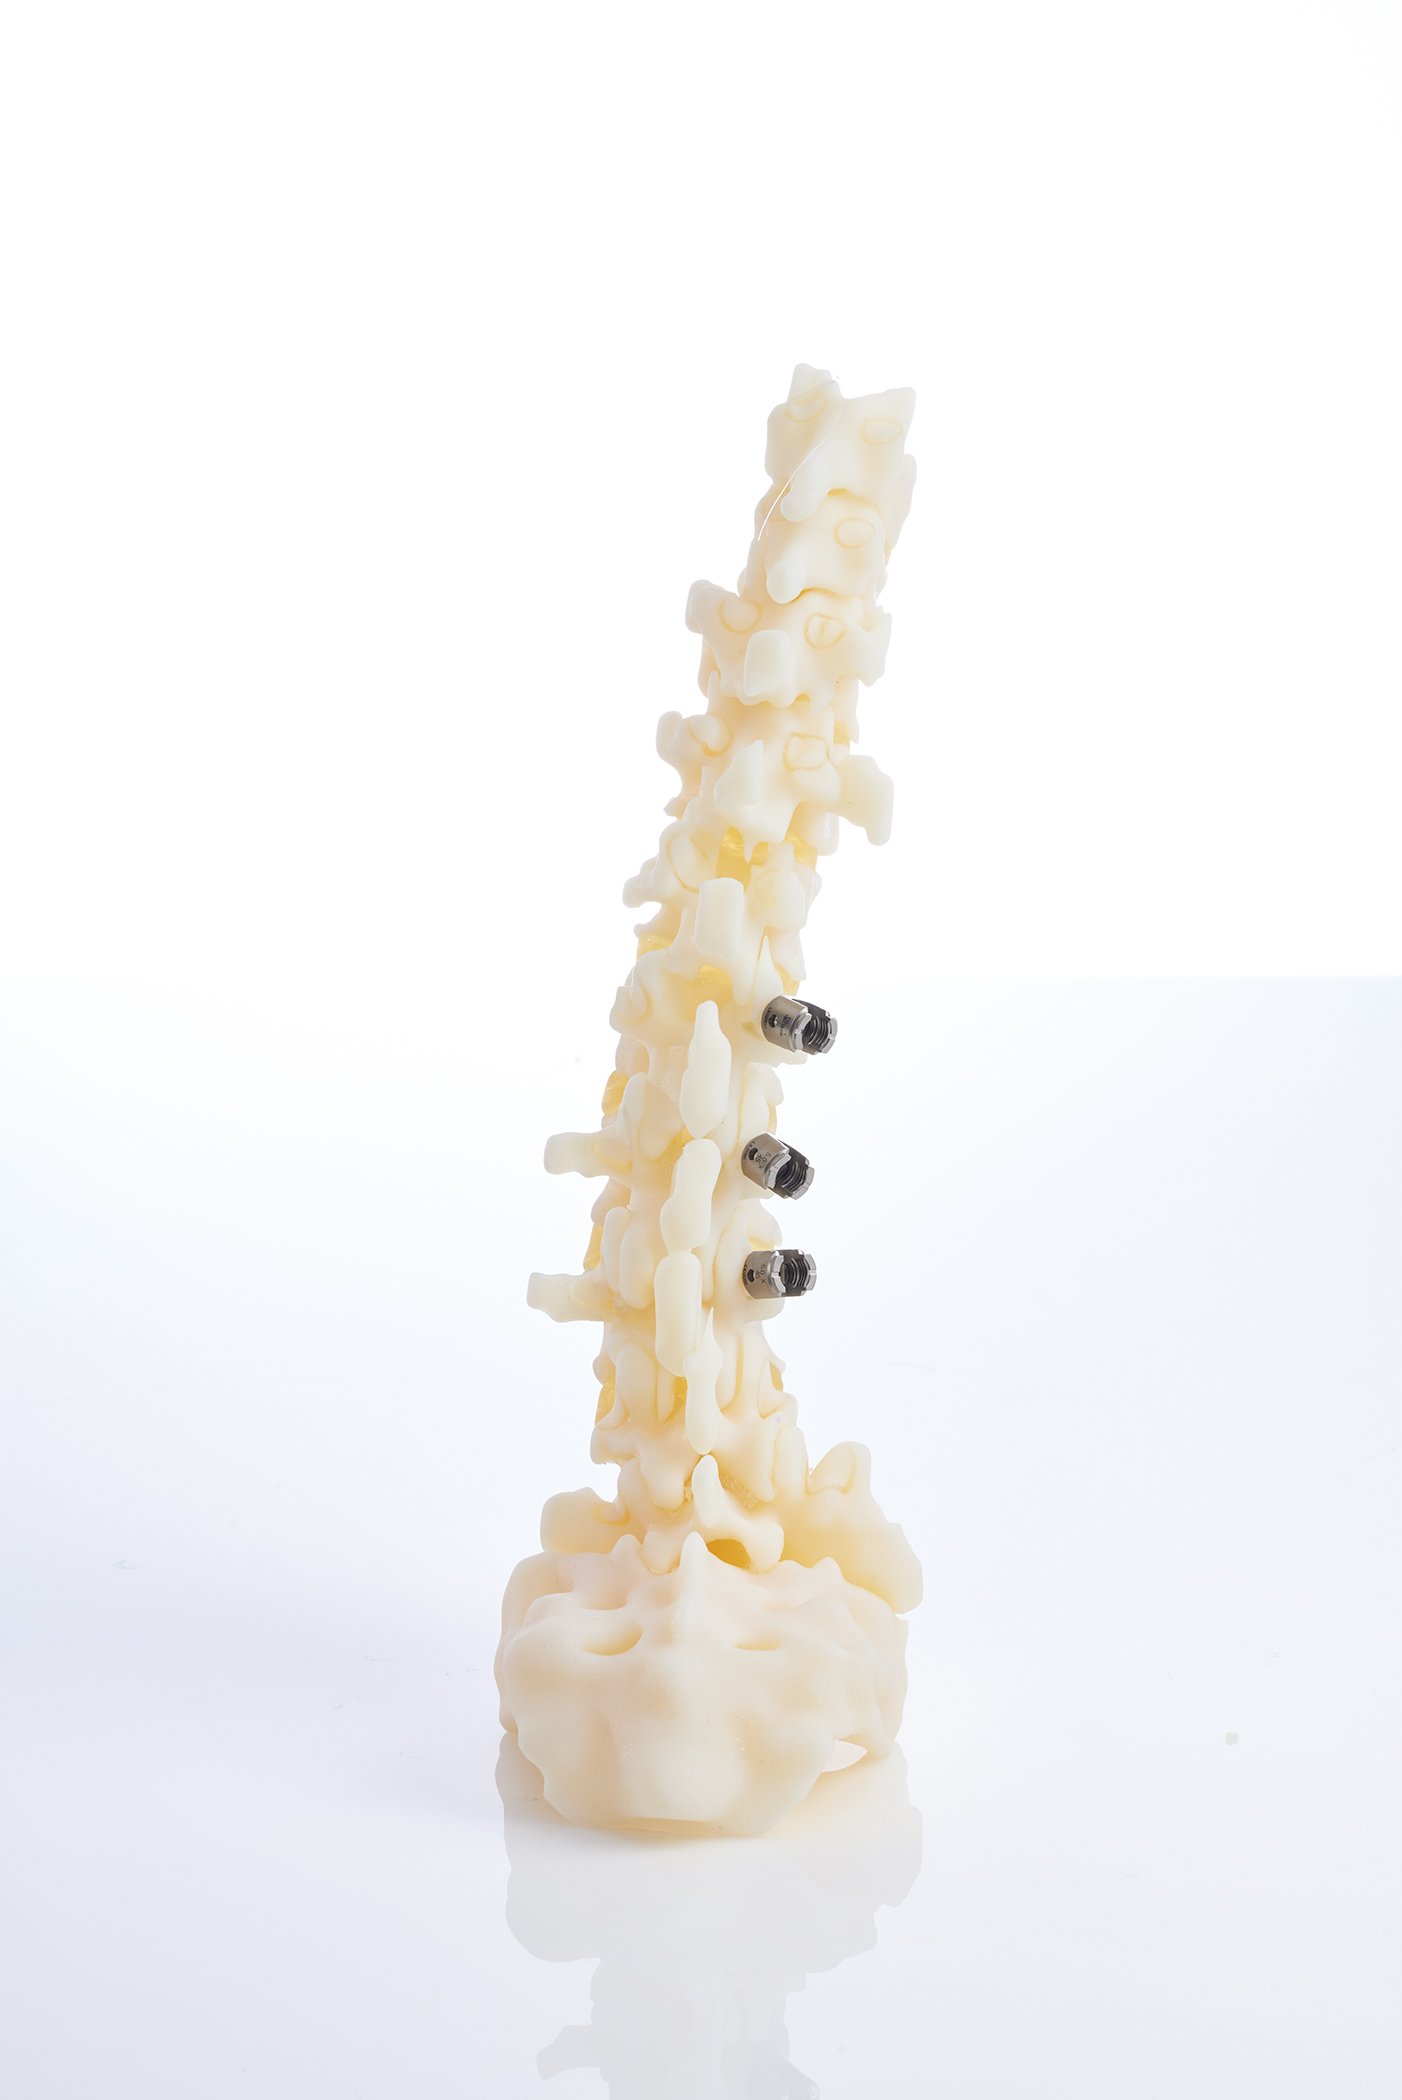 The Digital Anatomy 3D printer from Stratasys enables physicians to practice inserting screws for orthopedic applications with biomechanical realism similar to a human anatomy. Photo via Business Wire/Stratasys.